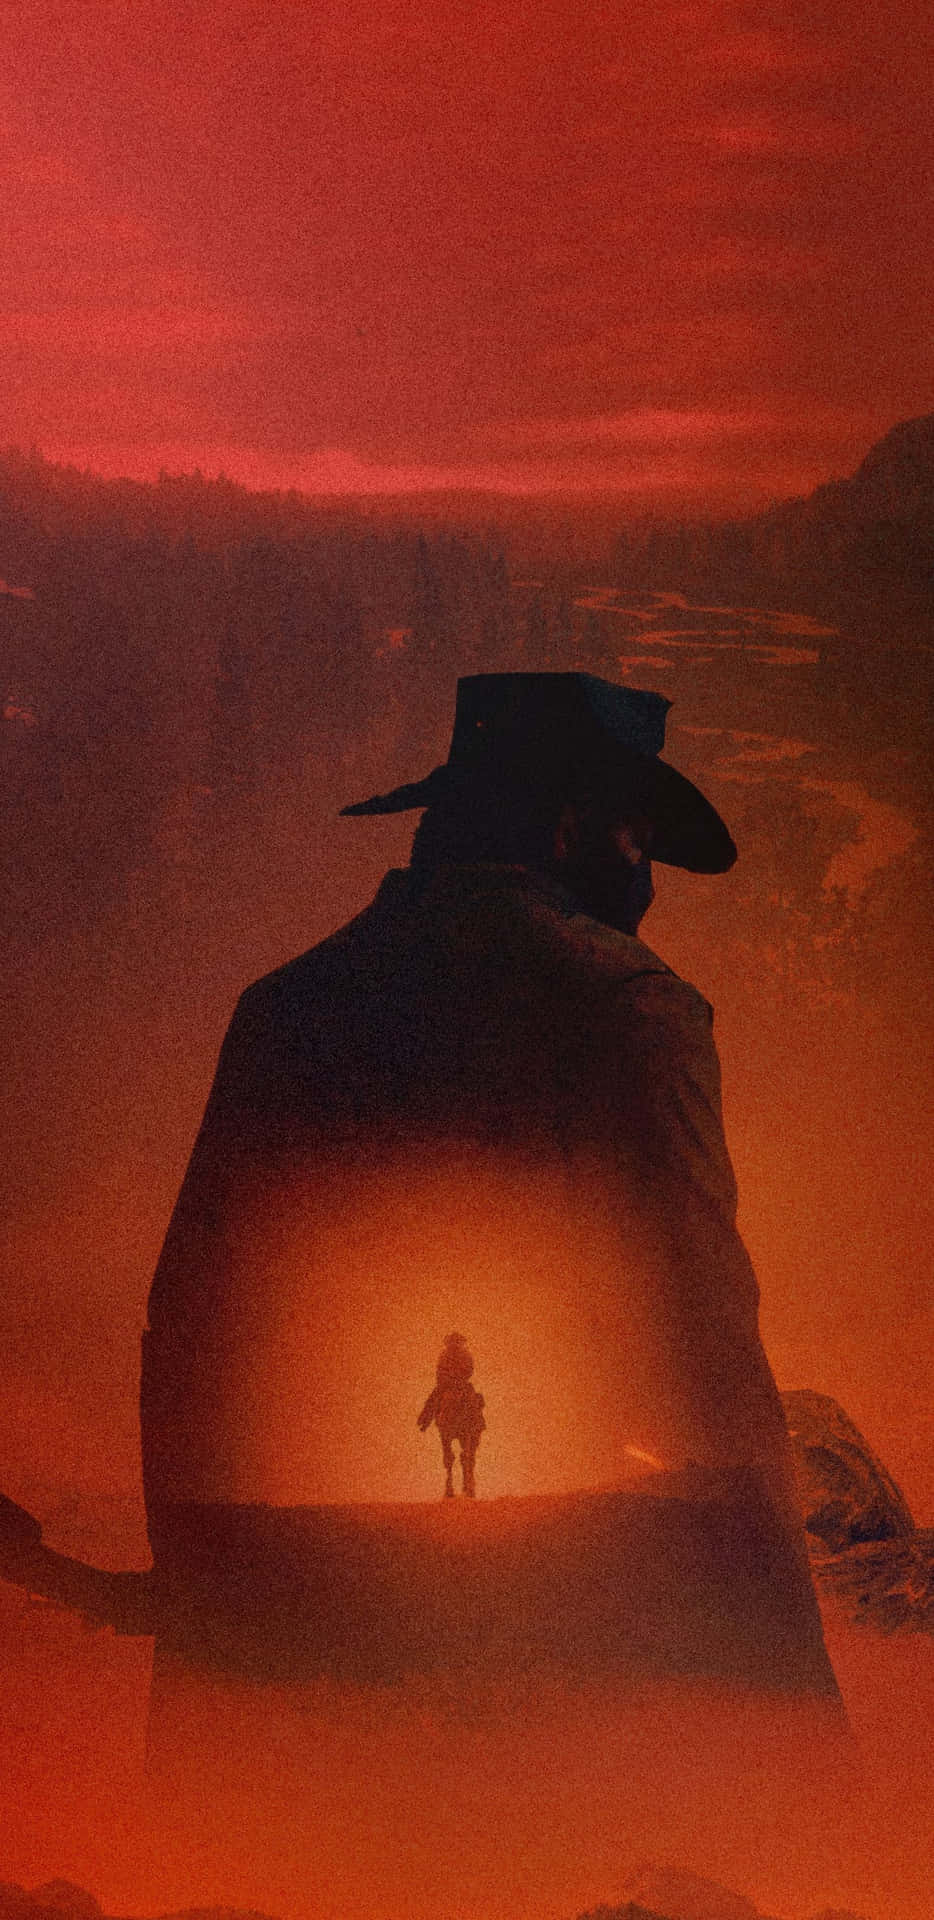 Feel the Wild West with this Cowboy iPhone Wallpaper